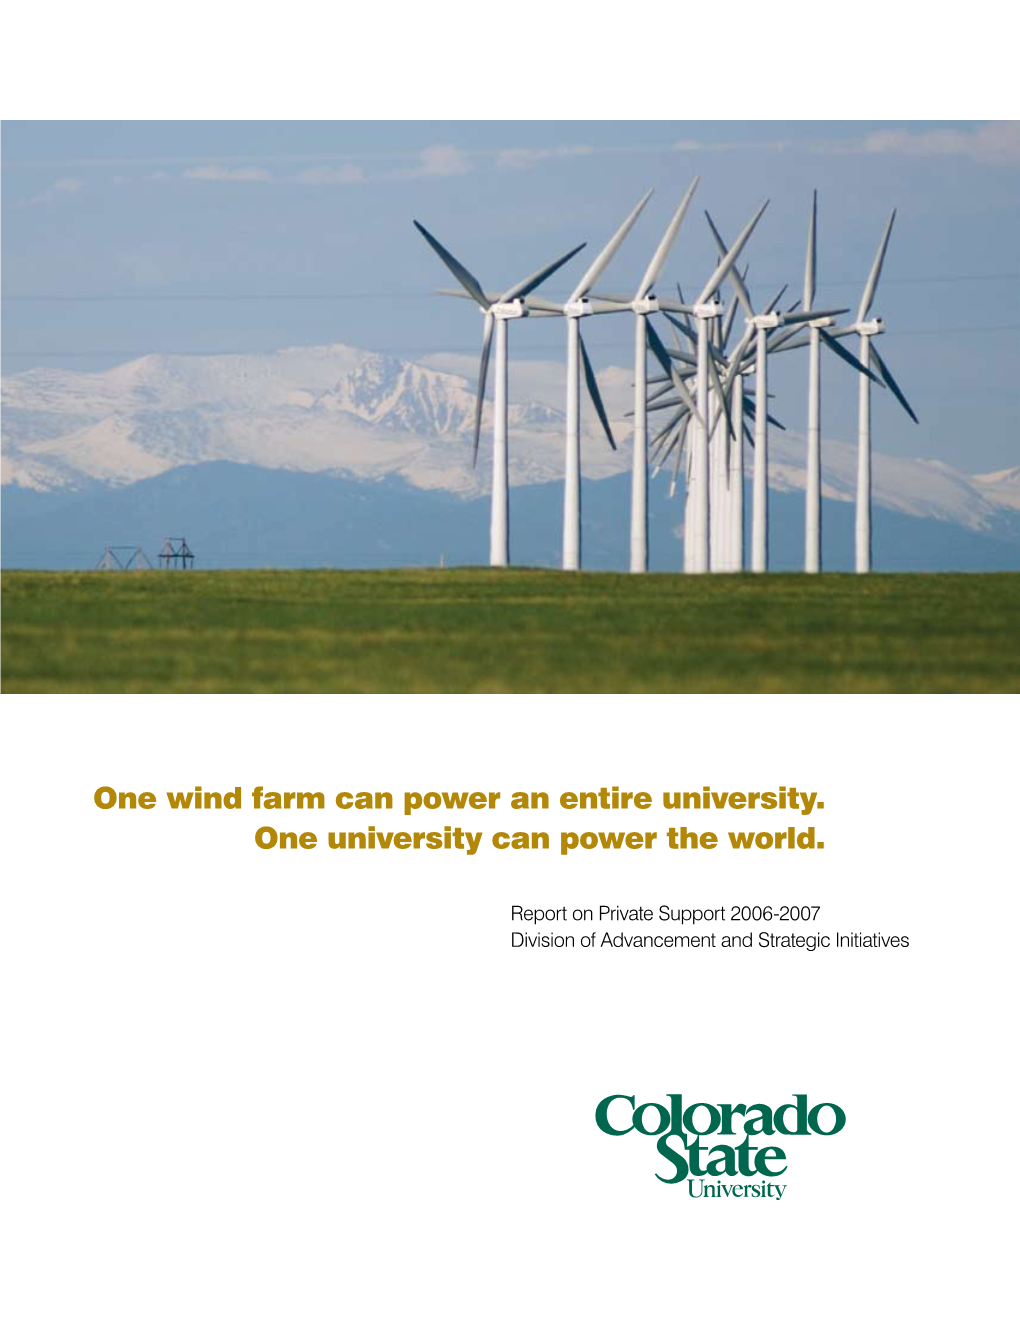 One Wind Farm Can Power an Entire University